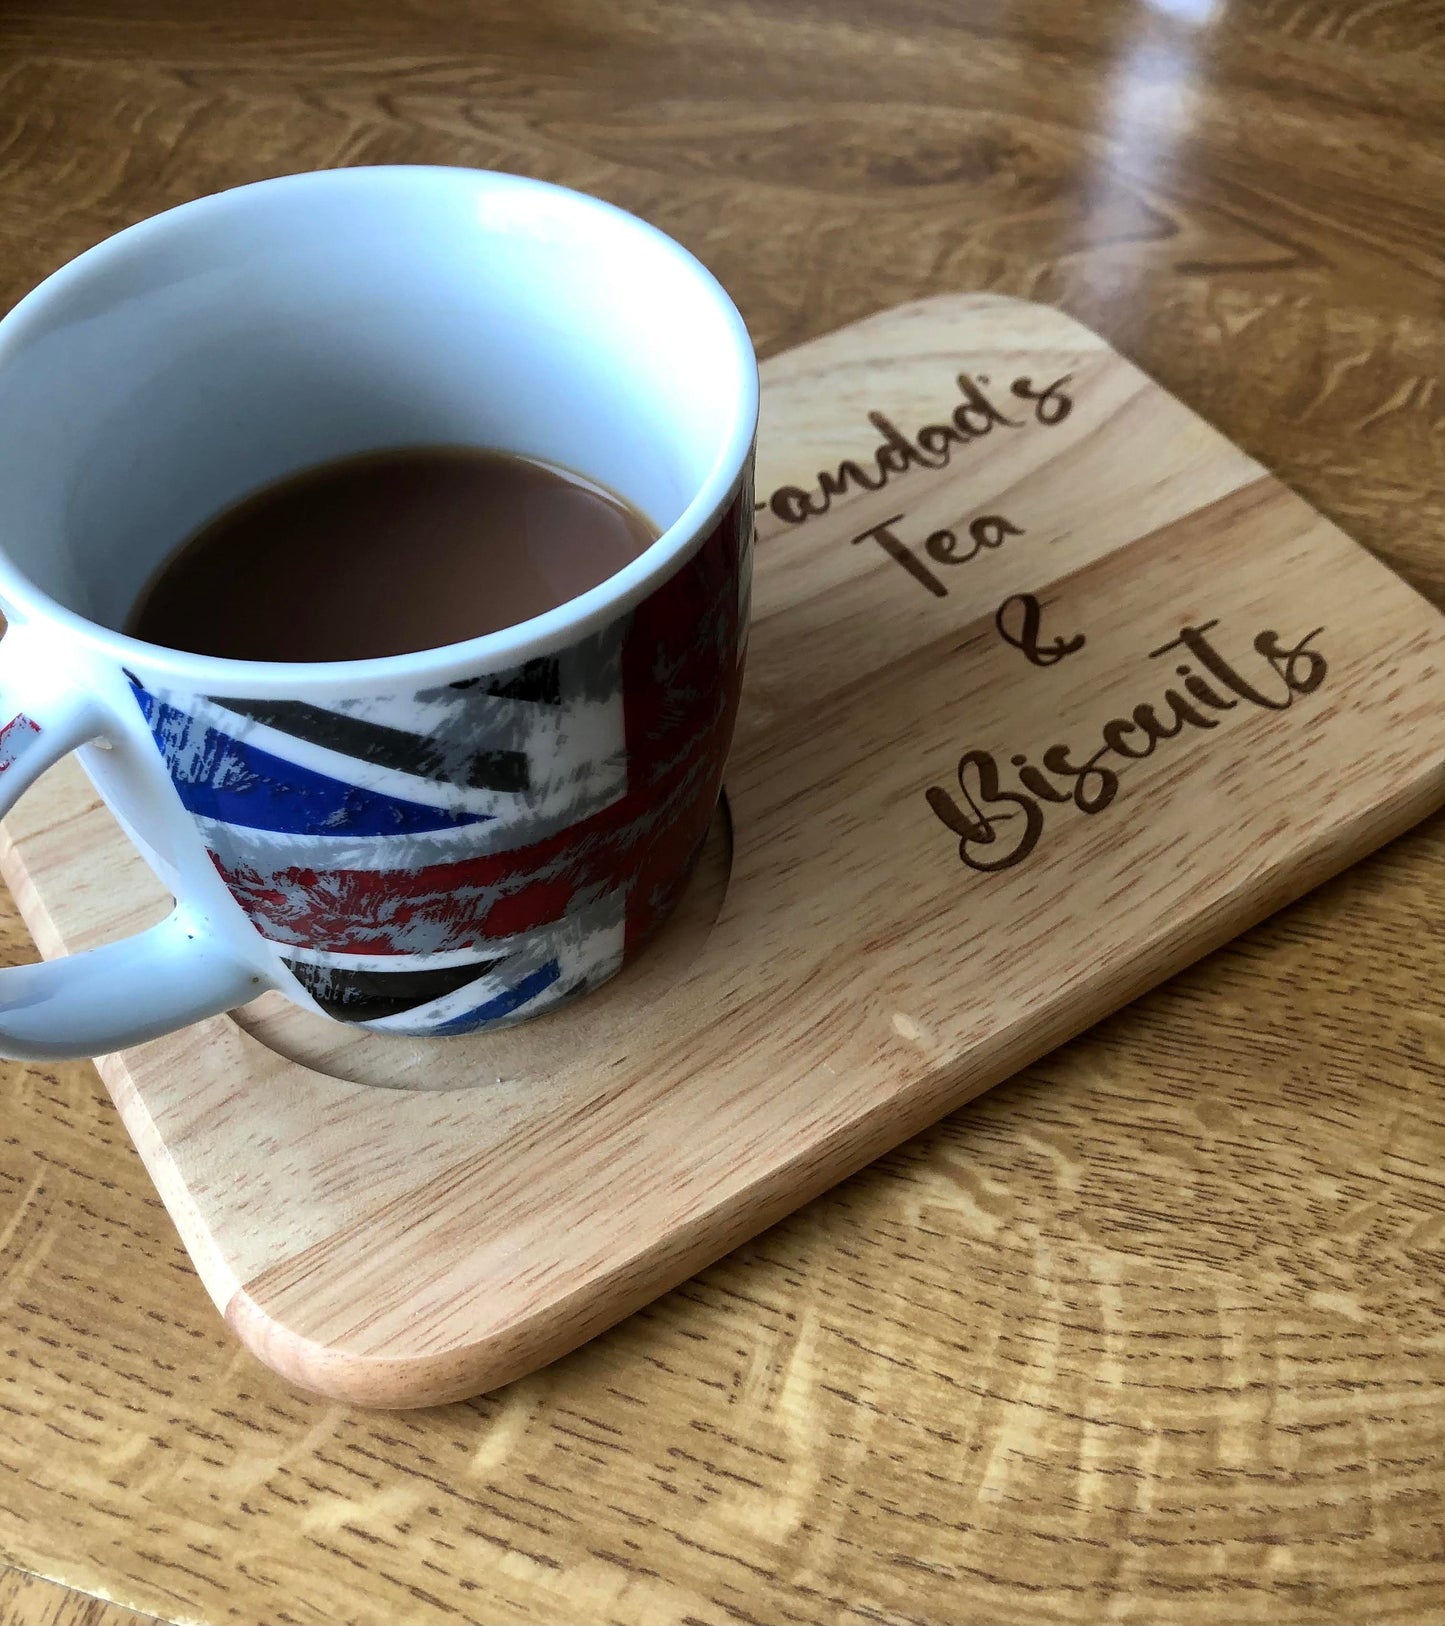 Coffee Serving Board Gift, tea and biscuits, coffee and cake